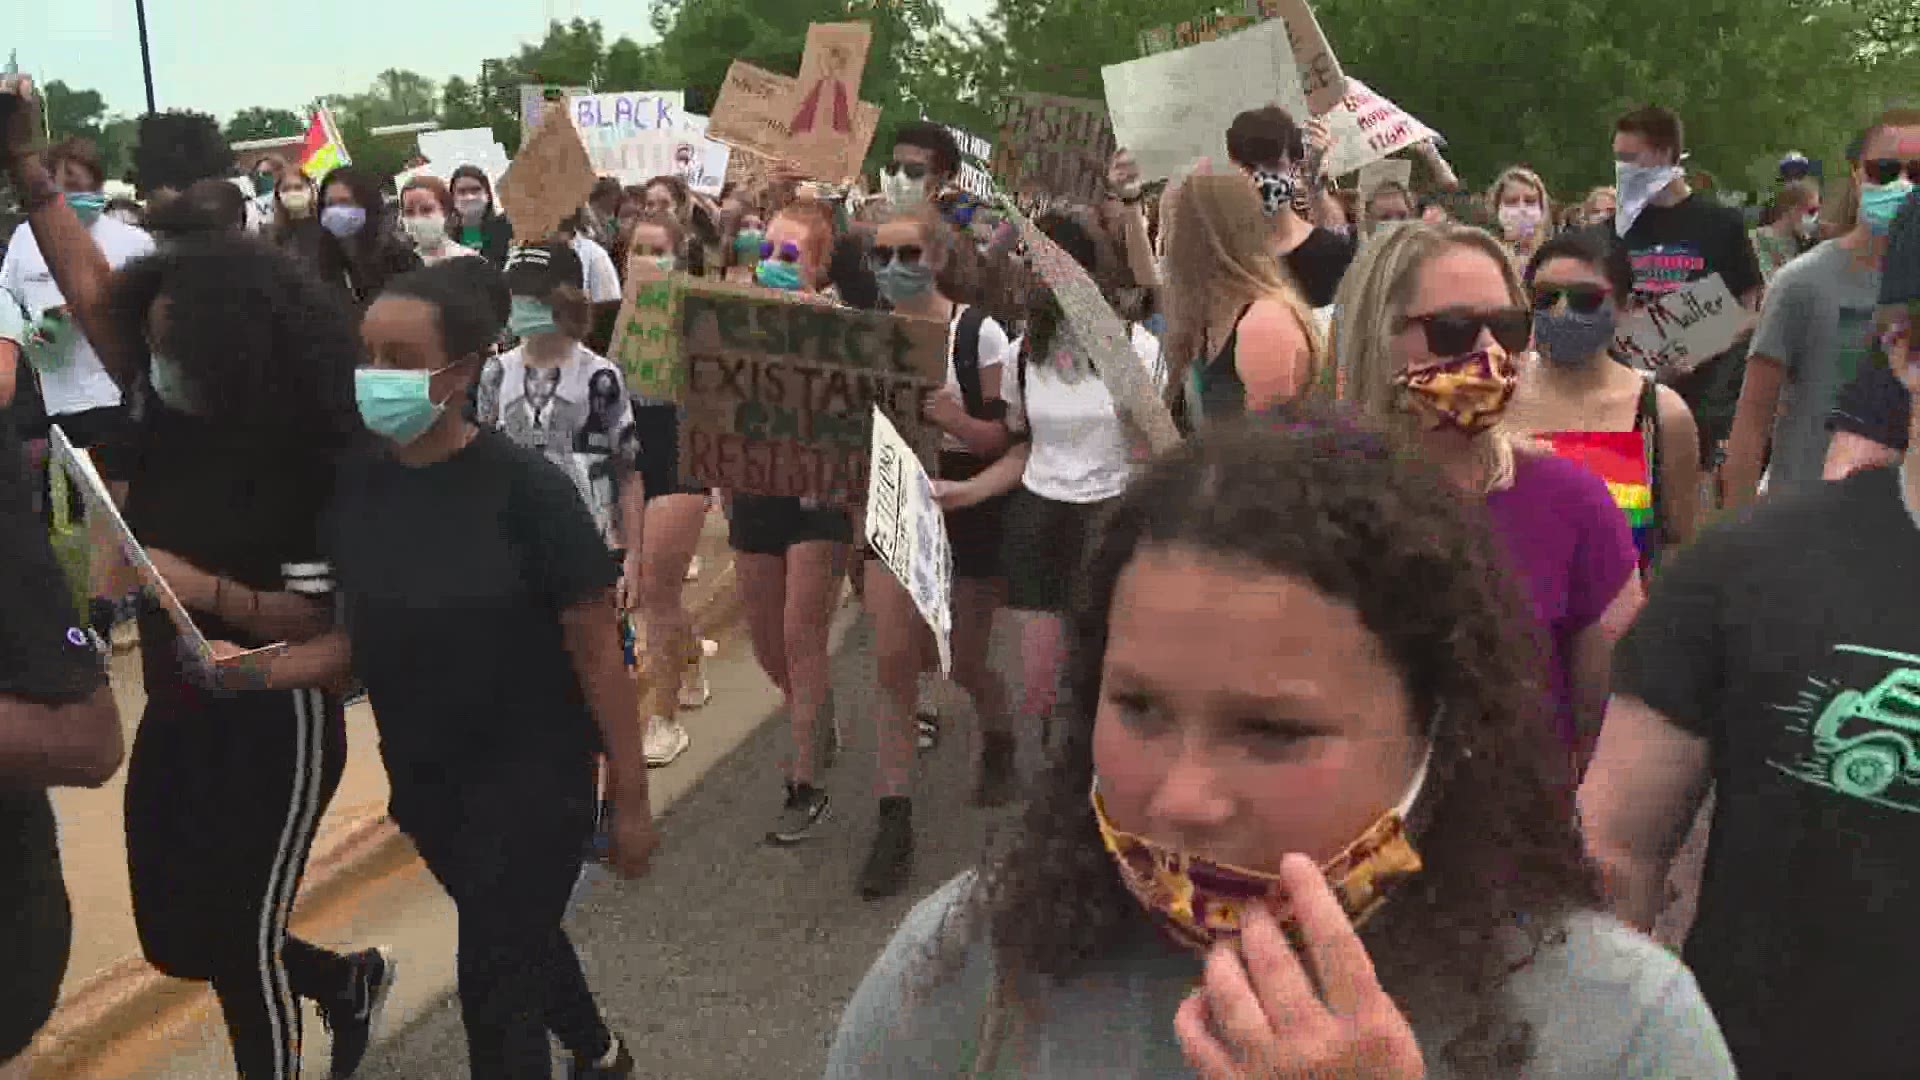 A couple hundred Grand Rapids youth gathered near Reed Lake in East Grand Rapids Friday in a peaceful Black Lives Matter protest.